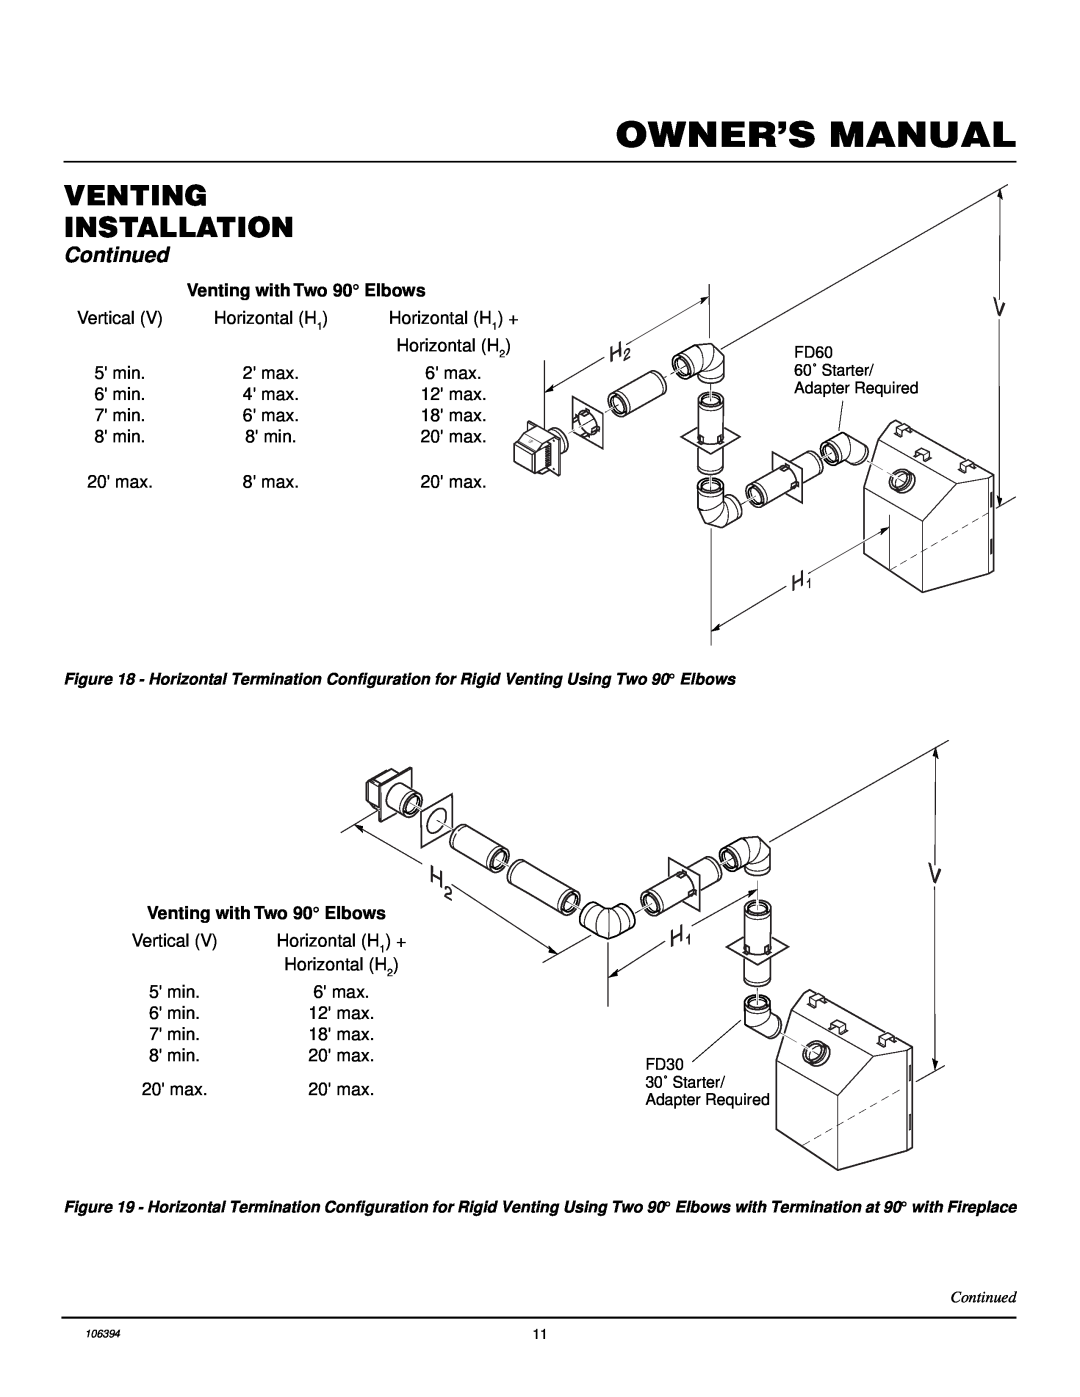 Desa DVFH34P installation manual Venting Installation, Continued, Venting with Two 90 Elbows 